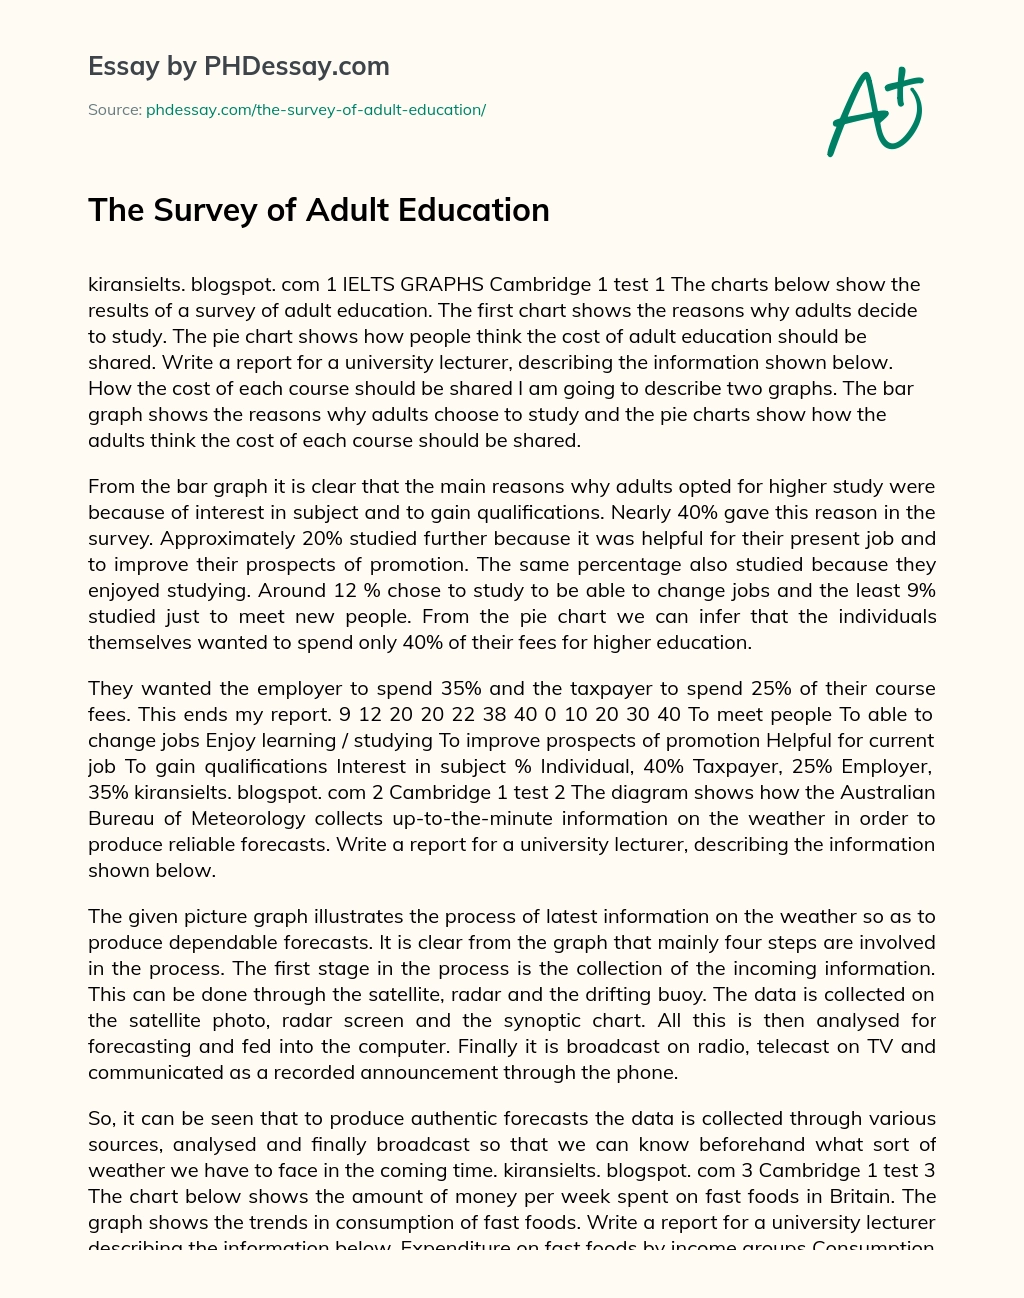 The Survey of Adult Education essay